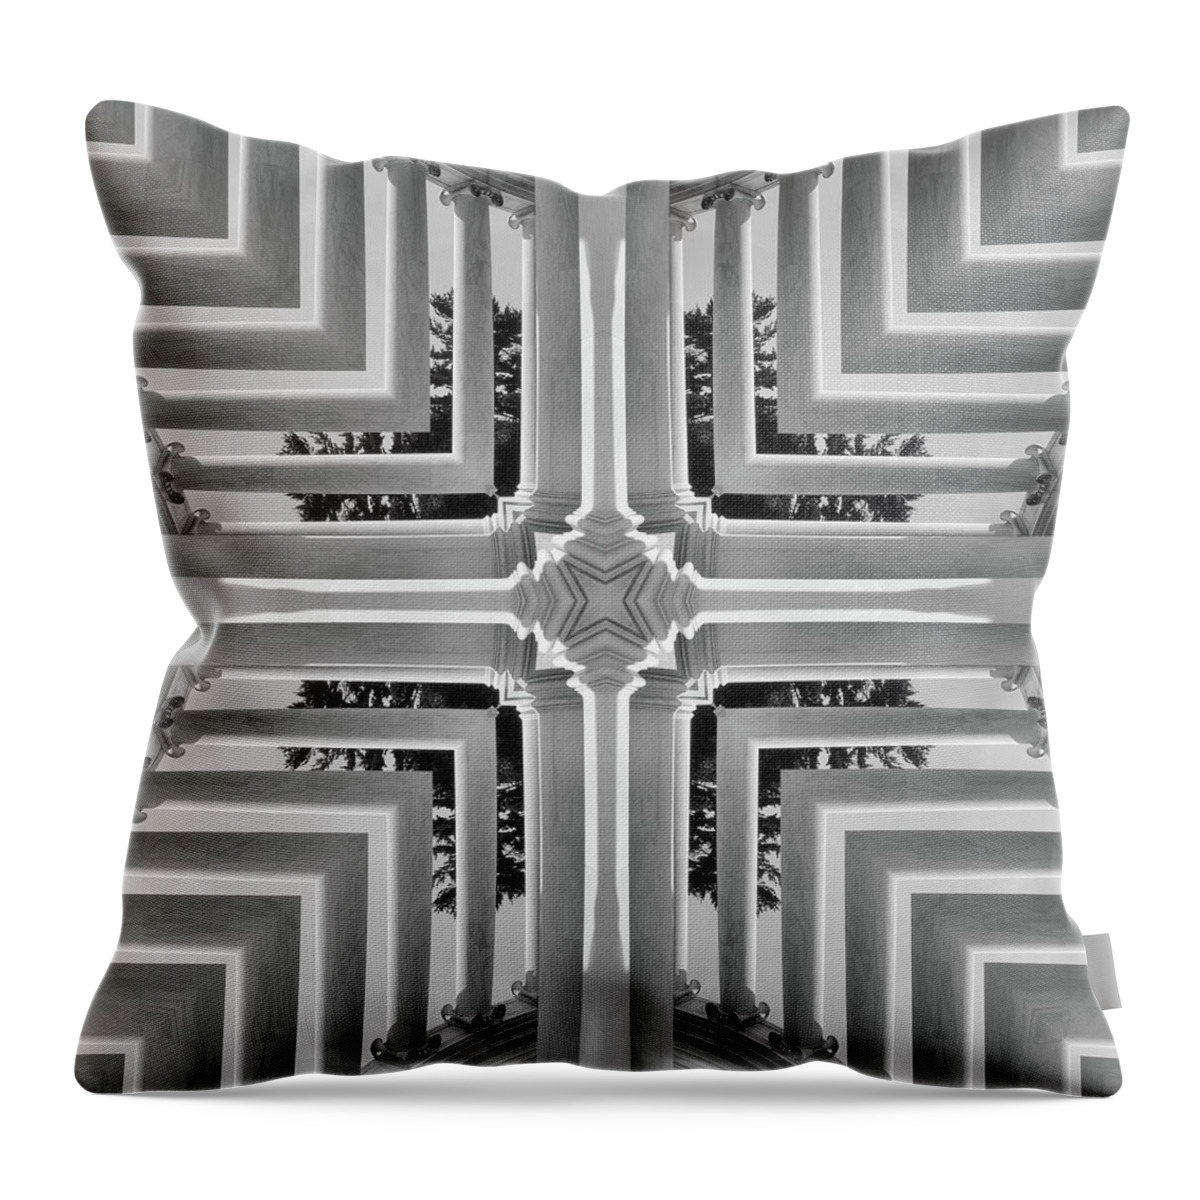 Abstract Columns Throw Pillow featuring the photograph Abstract Columns 23 by Mike McGlothlen